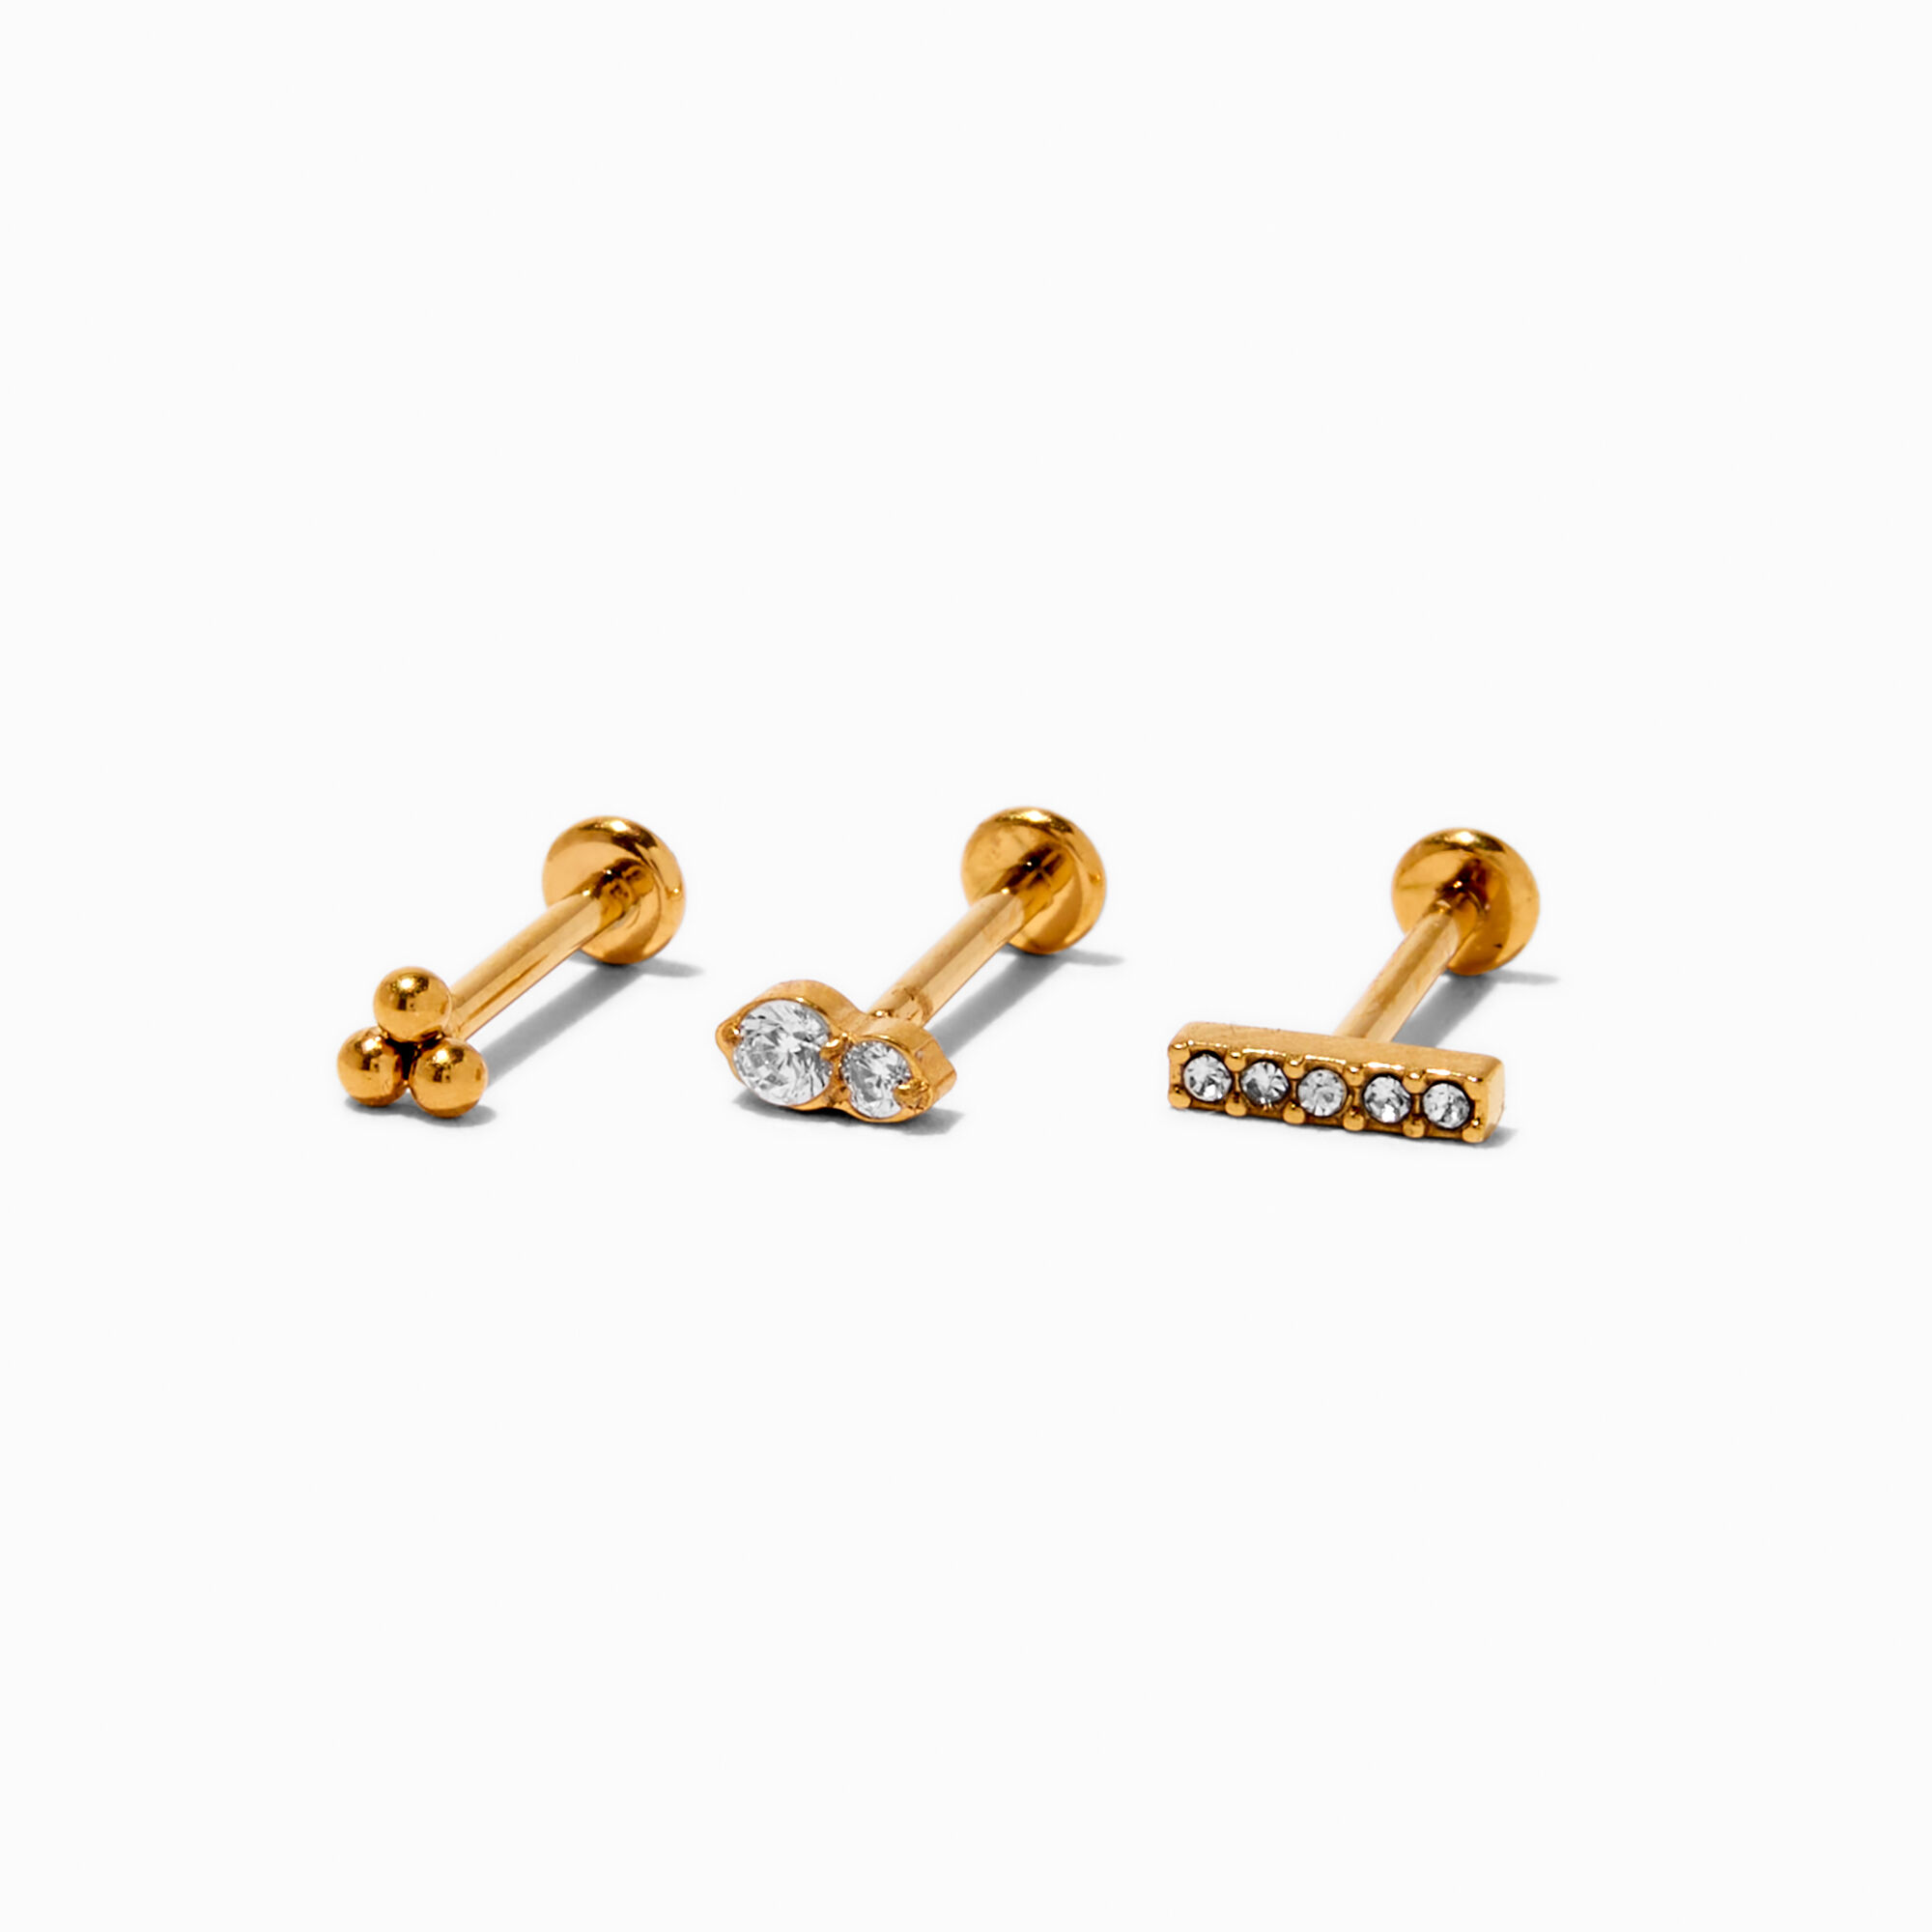 View Claires Tone Titanium Cubic Zirconia 18G Stud Threadless Cartilage Earrings 3 Pack Gold information